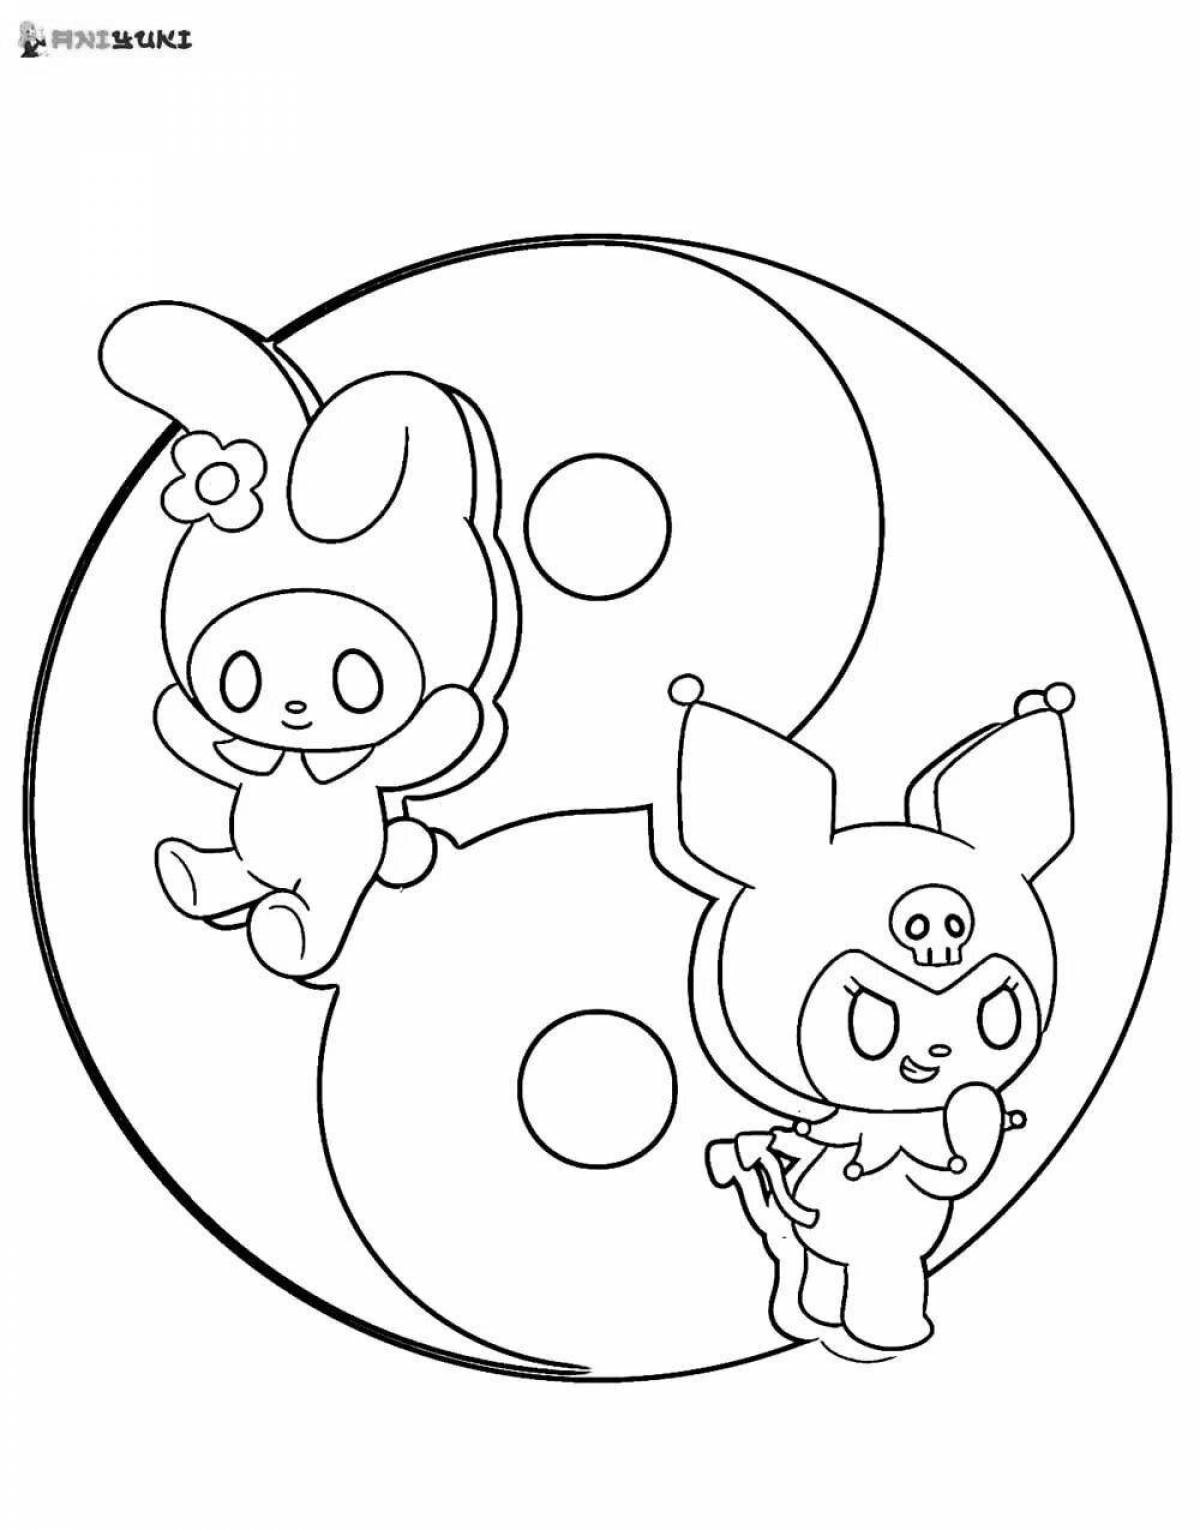 Kuromi's exquisite melody coloring page